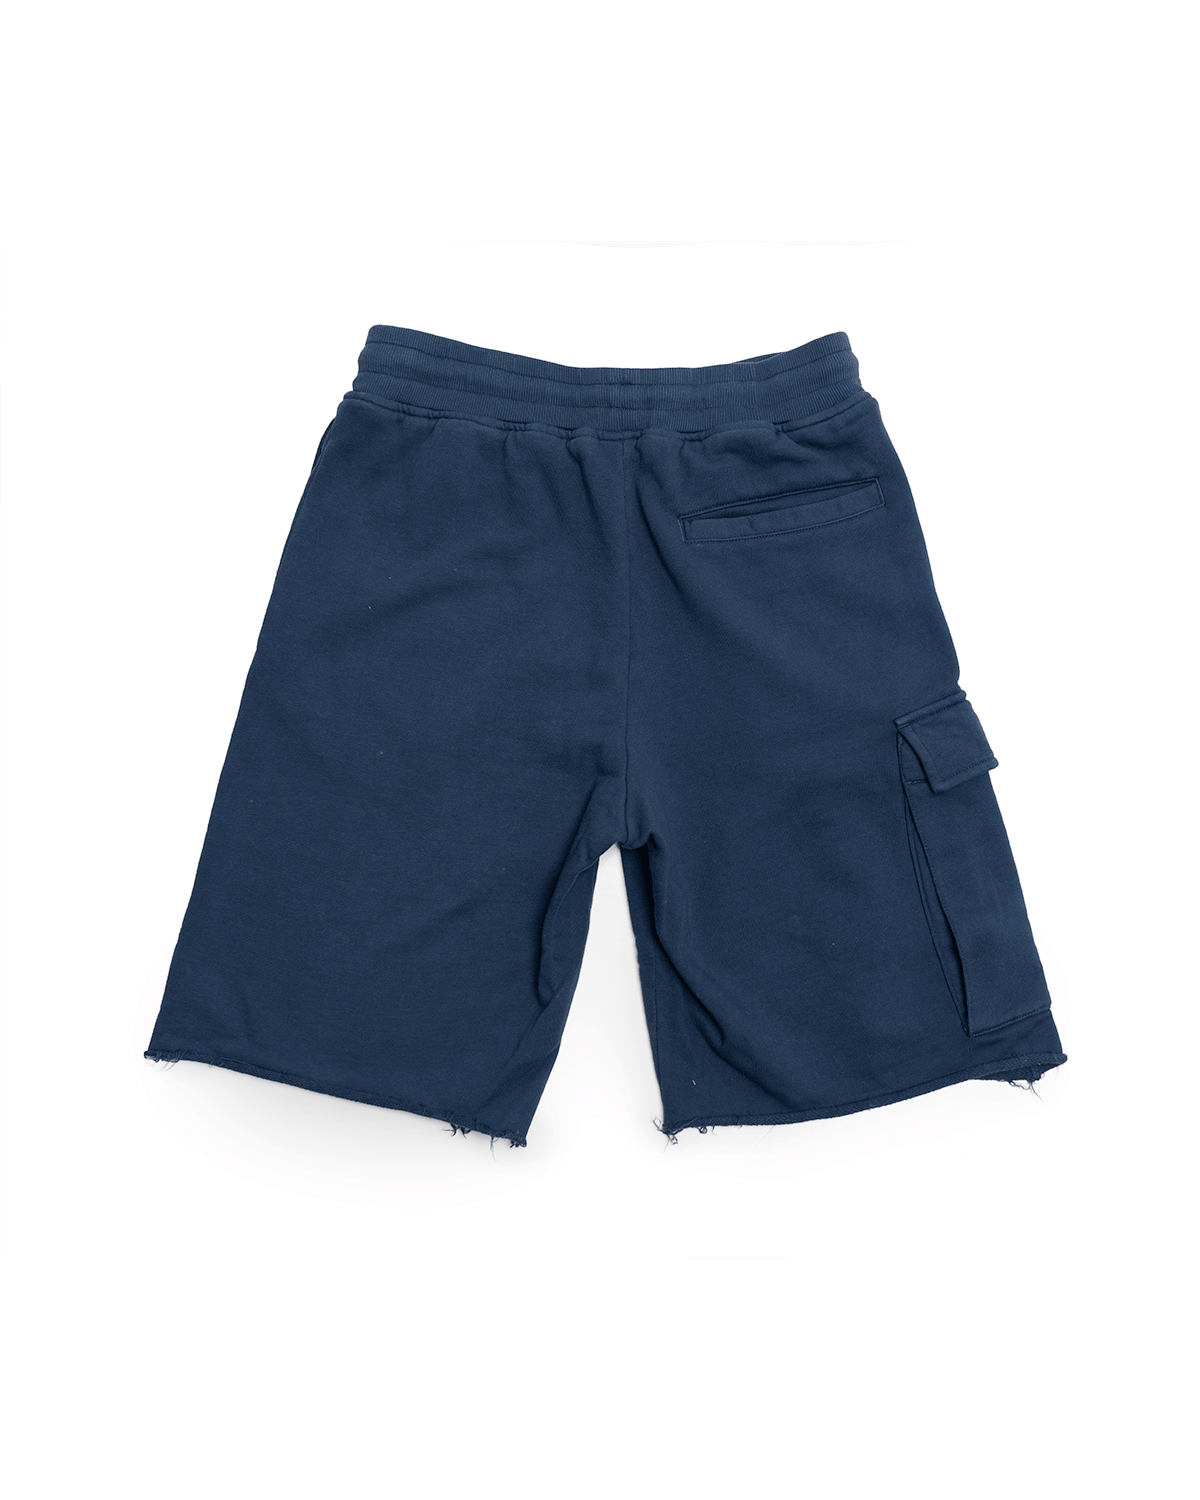 Stampd Classic Logo Sweat Shorts Navy